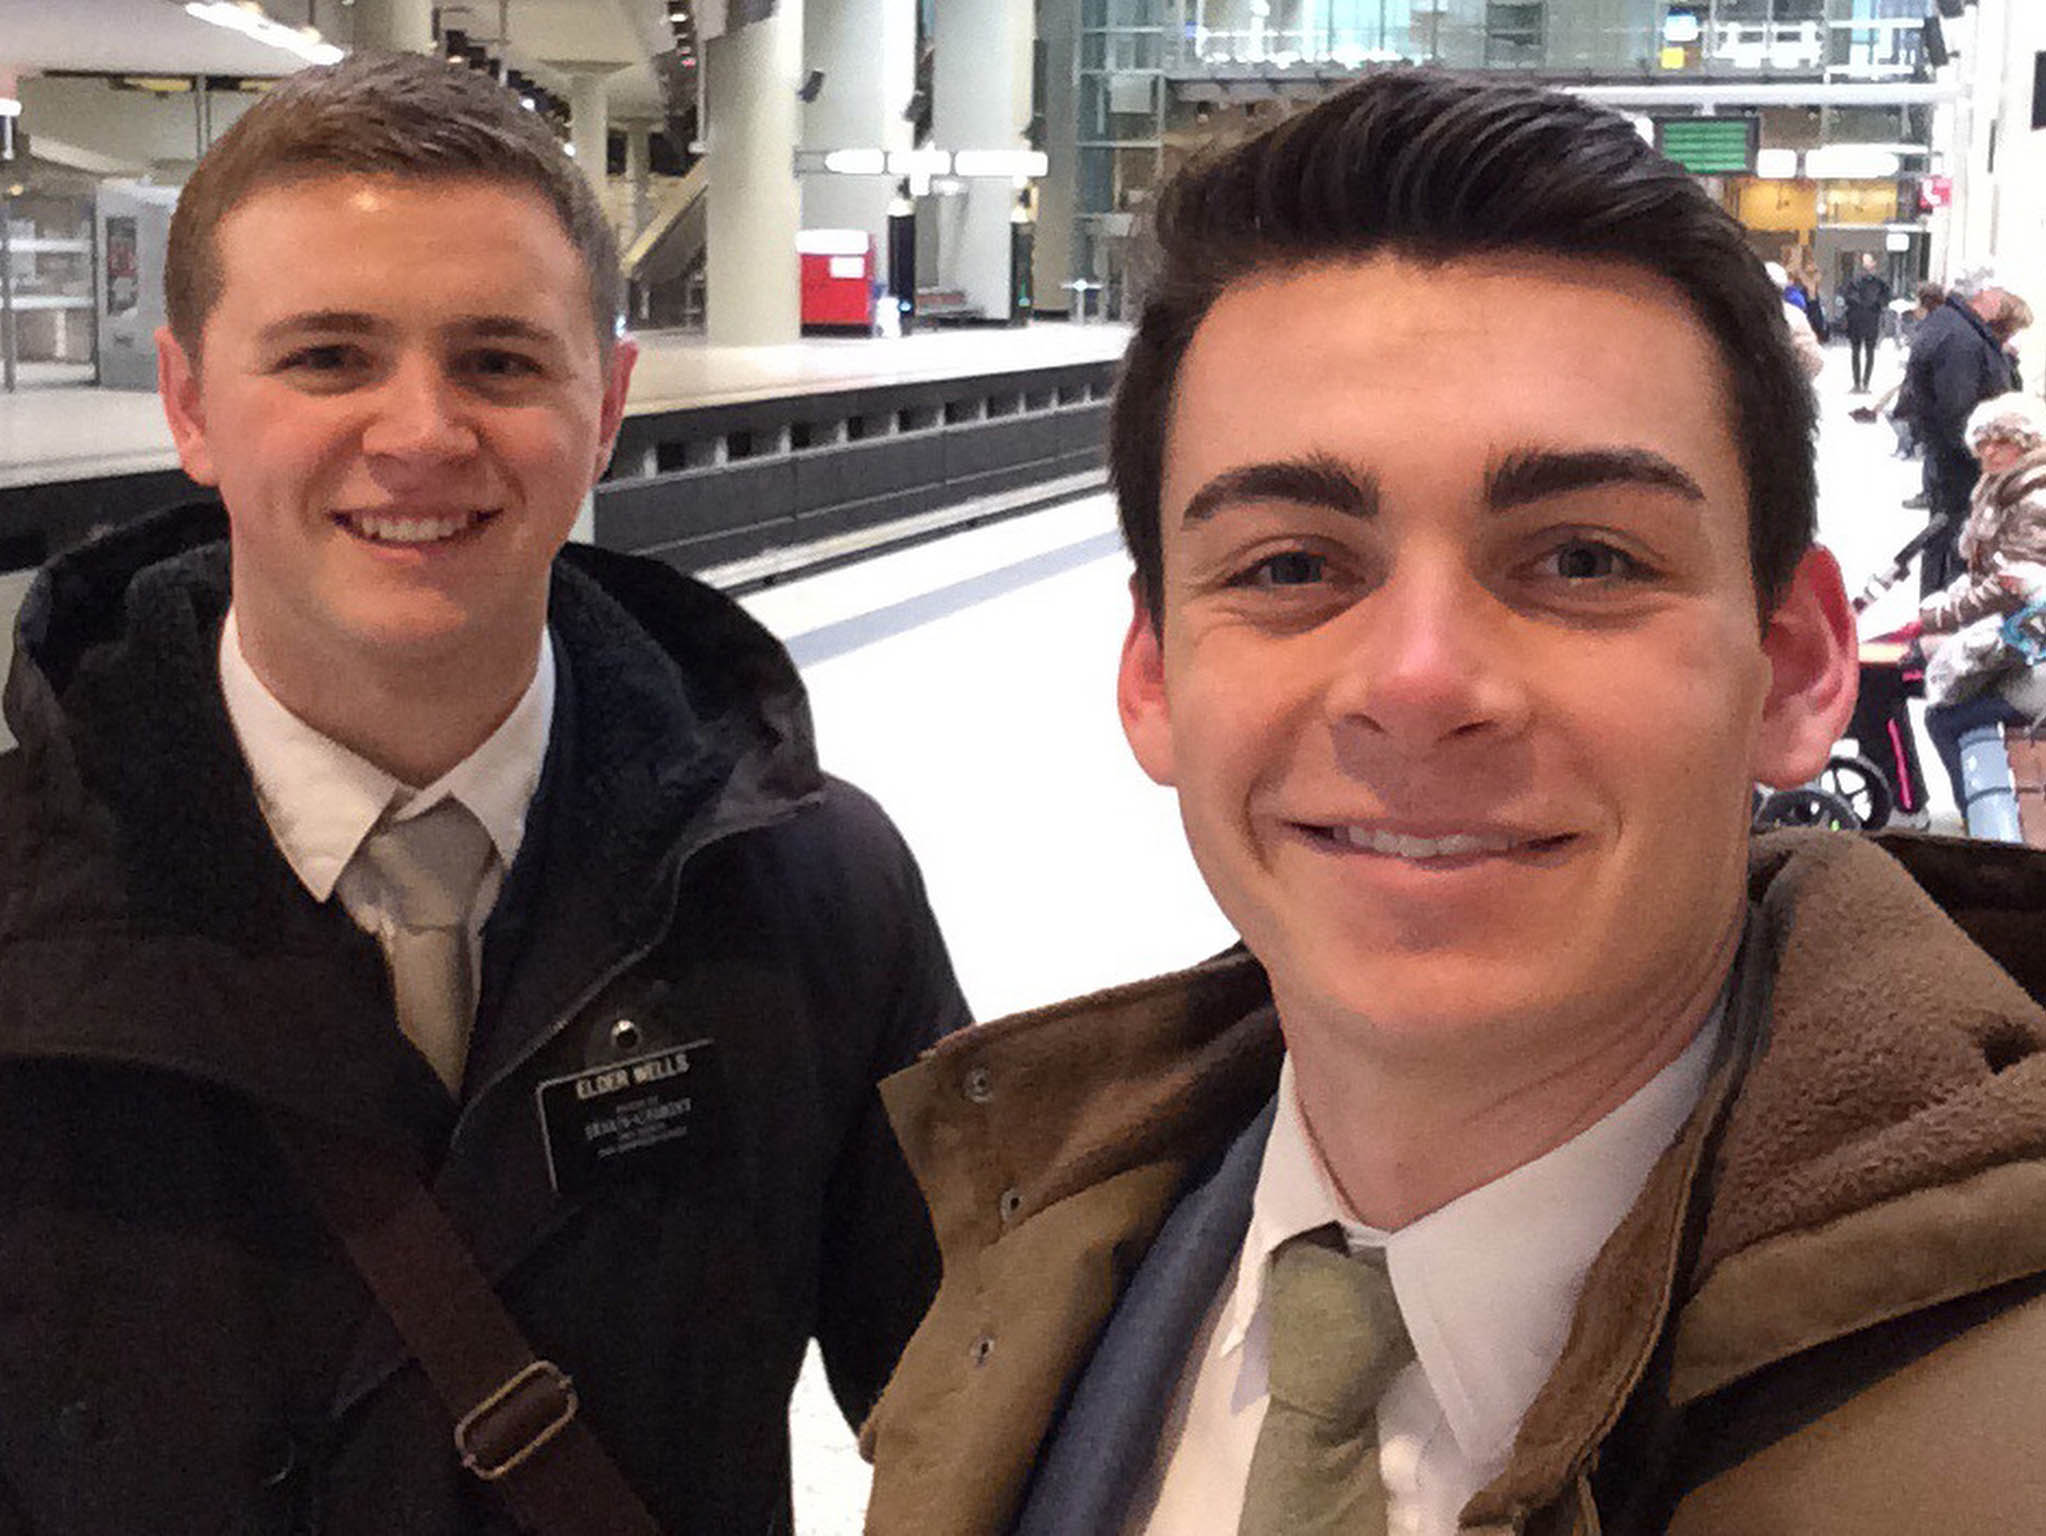 Mormon missionaries Mason Wells (leflt) and Joseph Empey were both were injured in Tuesday's explosion at the Brussels airport